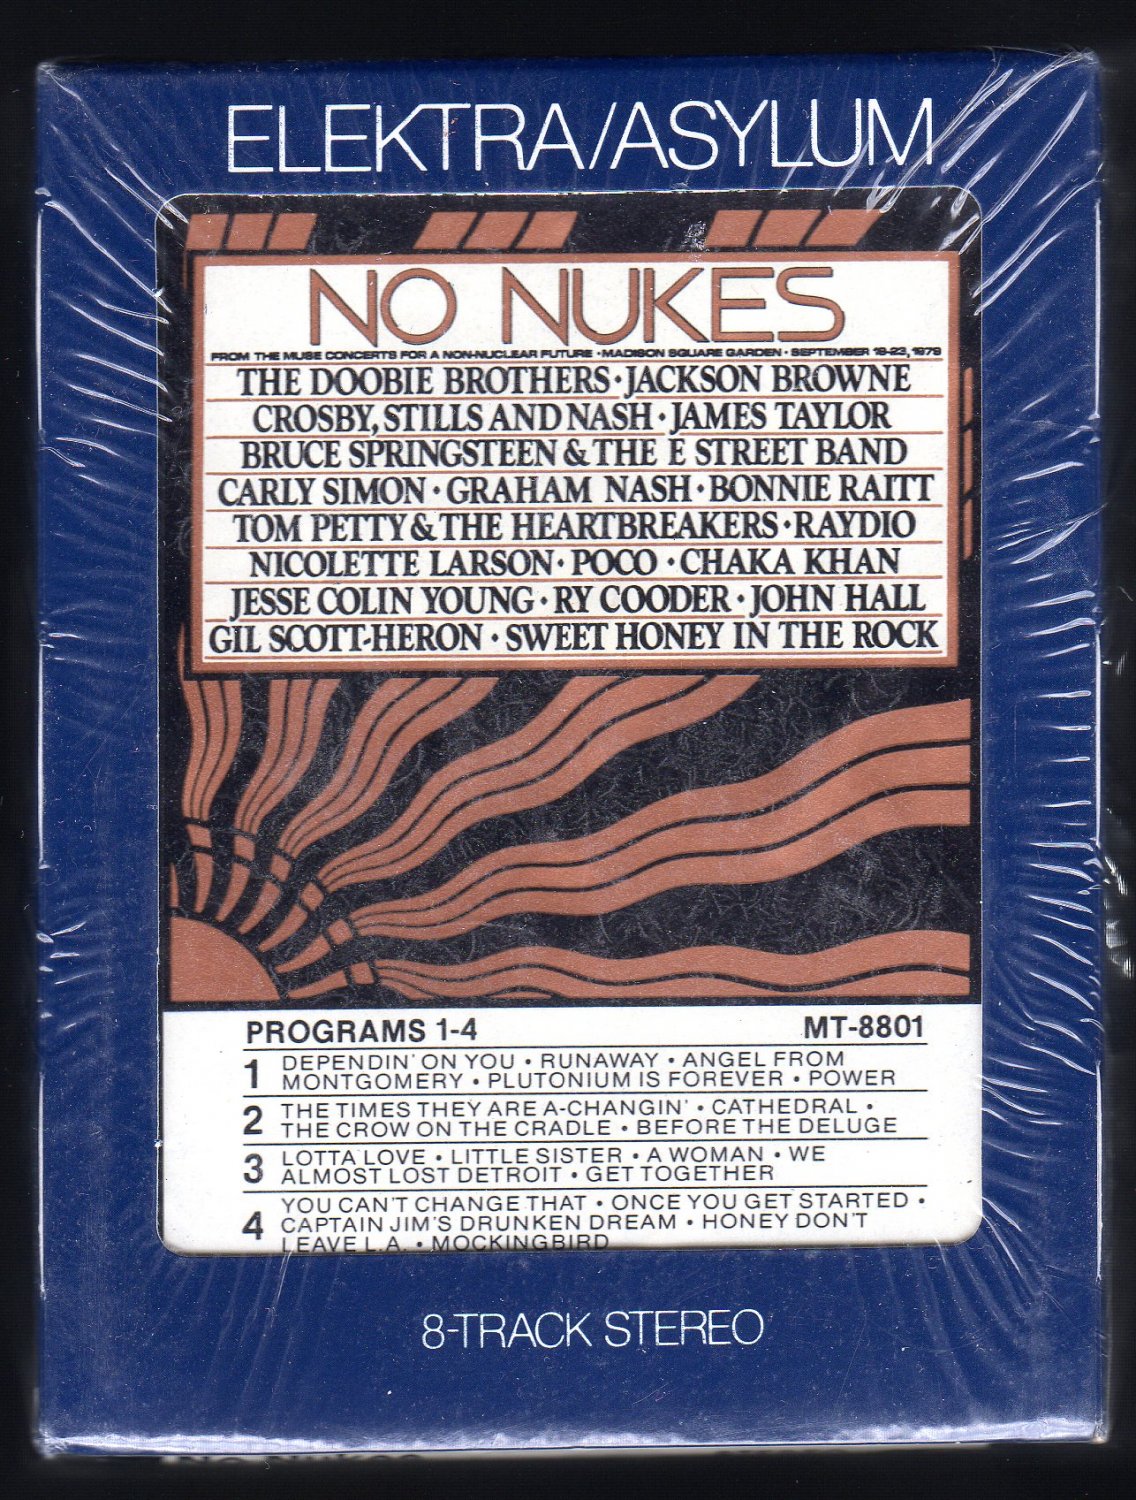 No Nukes - From the Muse Concerts Non-Nuclear Future Part A & B 